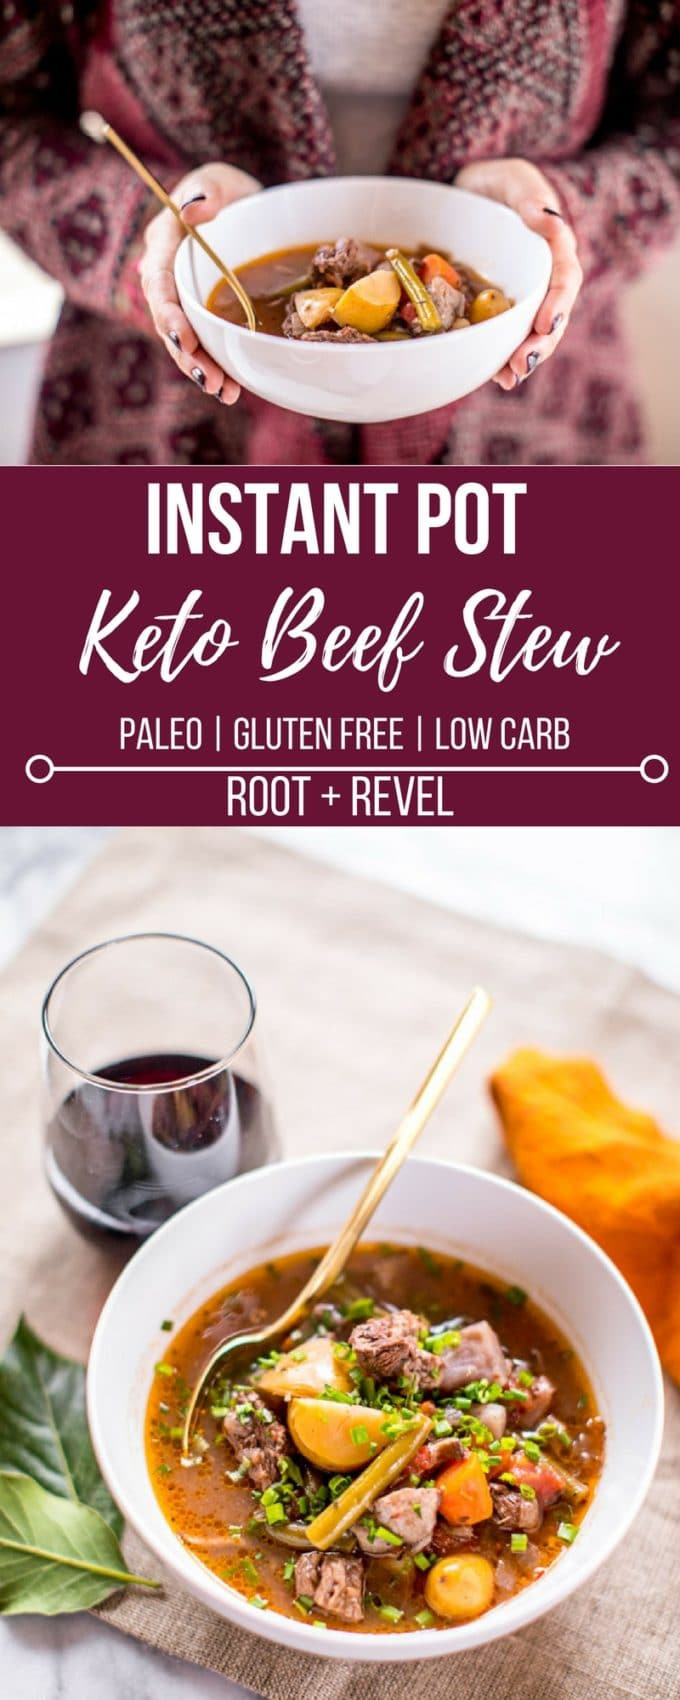 Instapot Keto Stew
 Keto Beef Stew in the Instant Pot or Slow Cooker